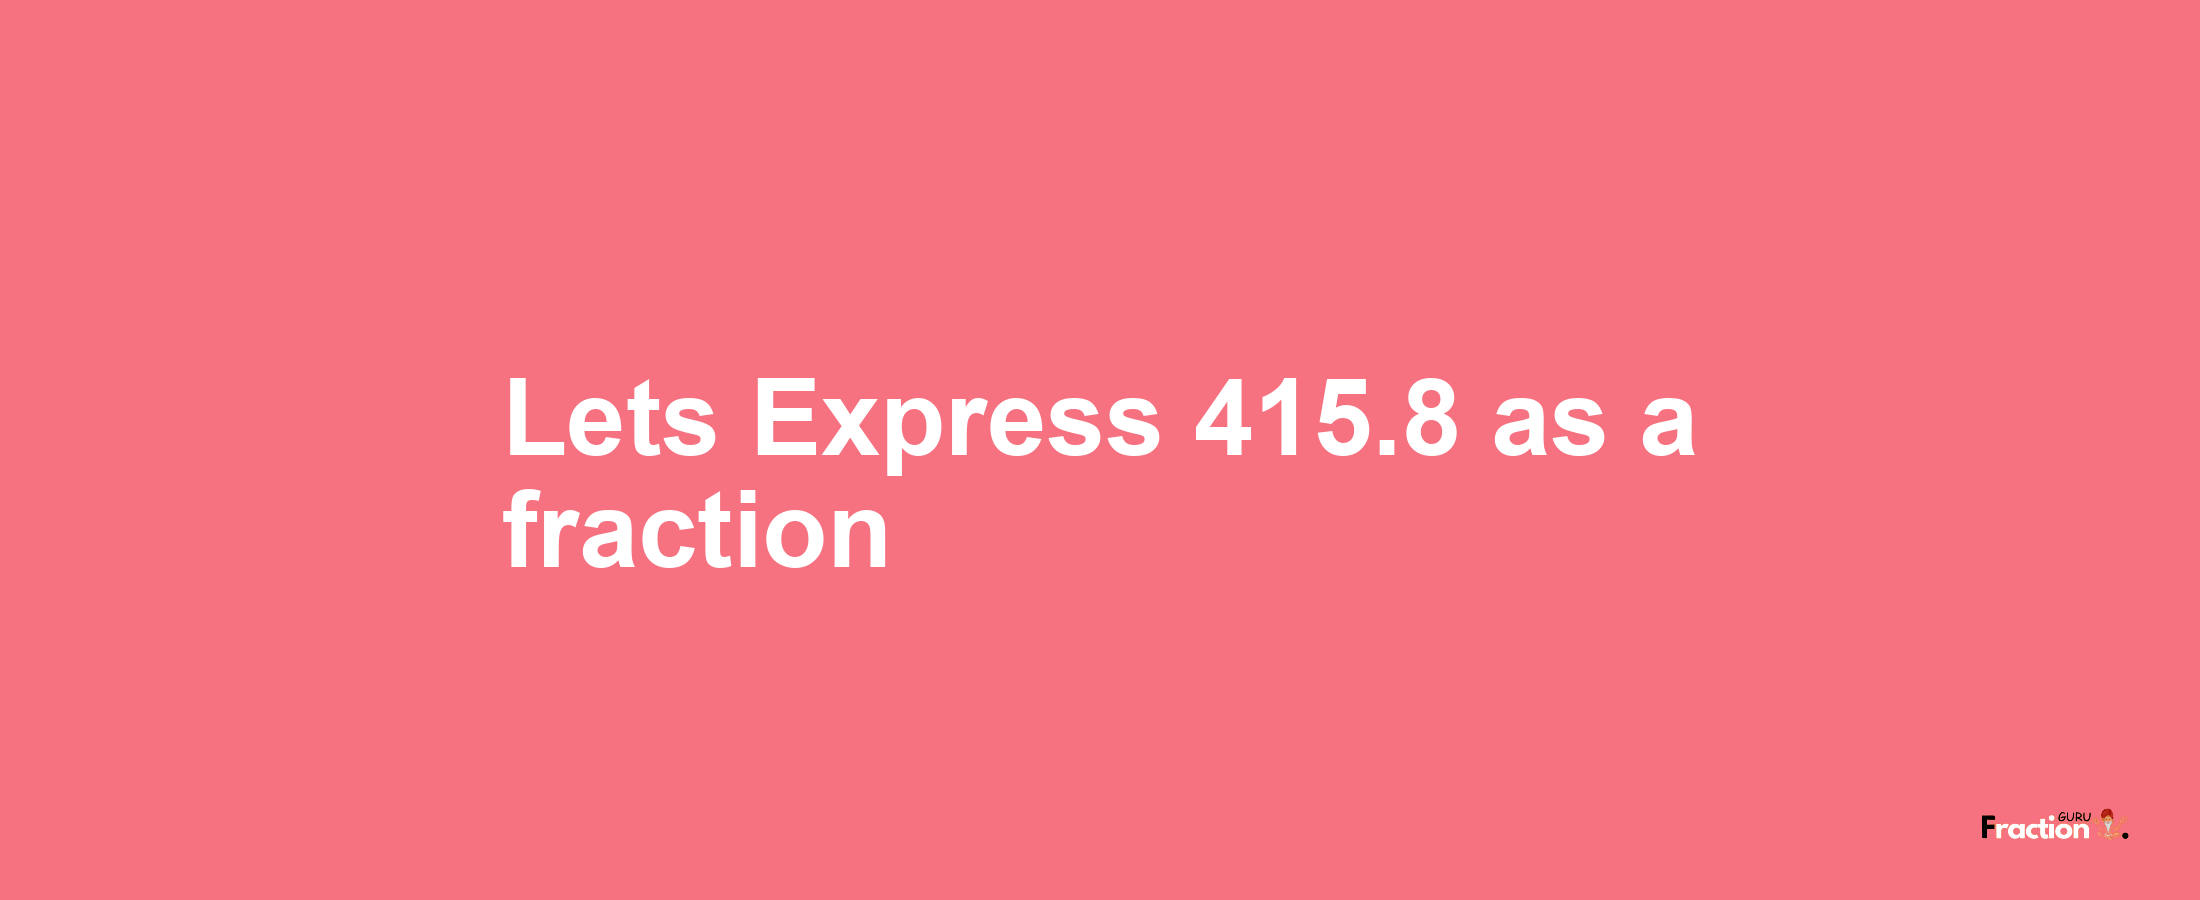 Lets Express 415.8 as afraction